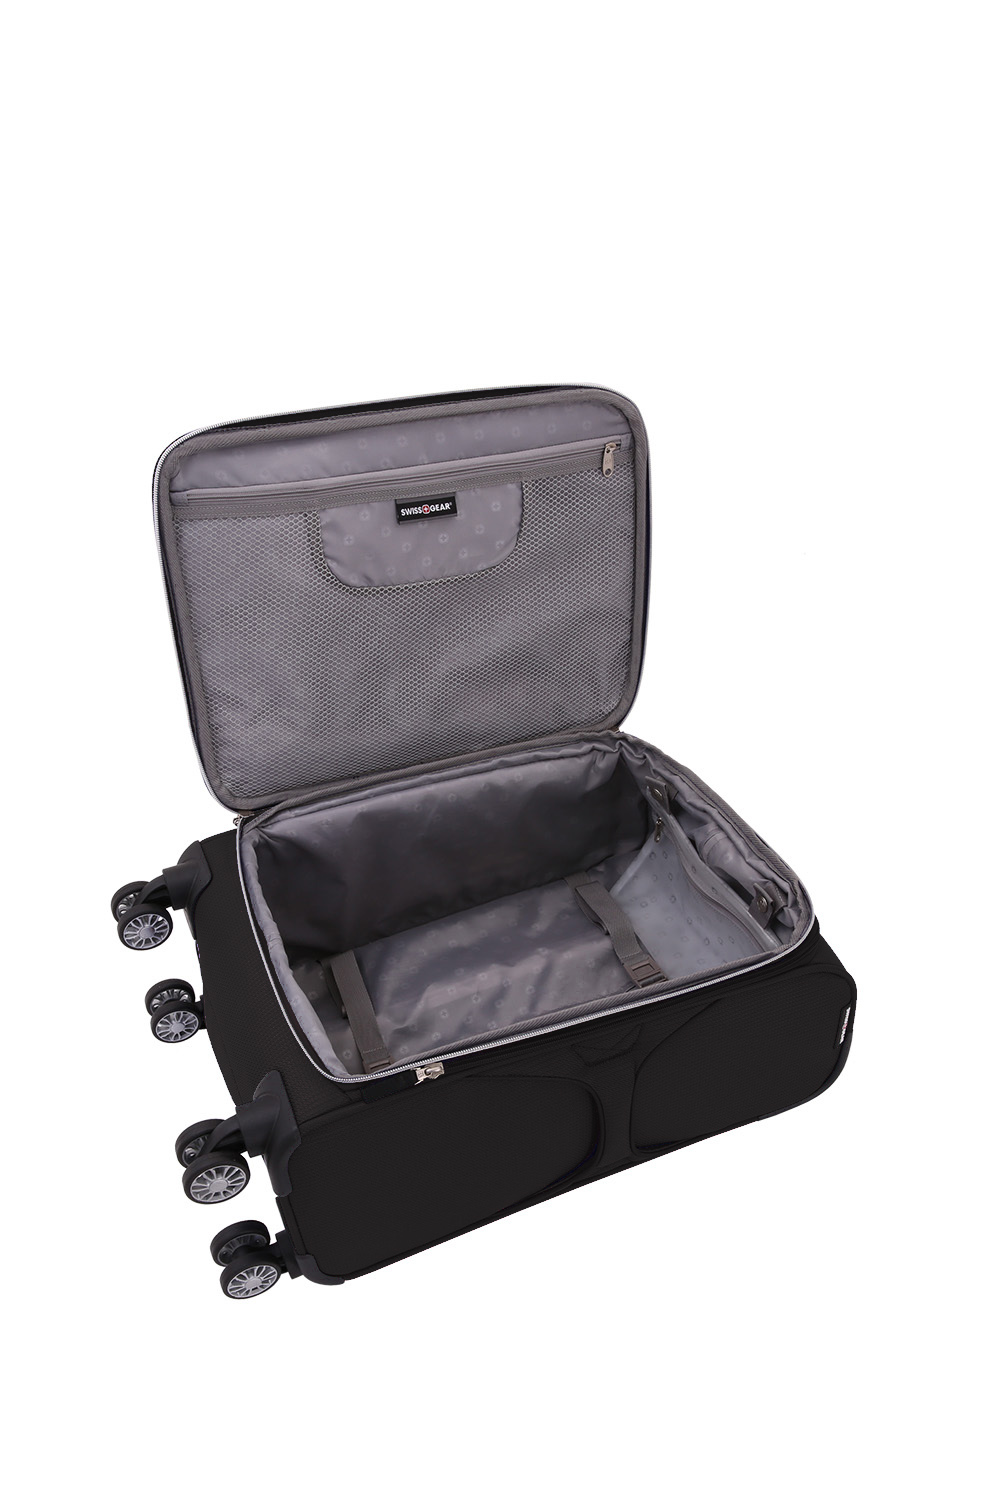 Swissgear 7850 20 Checklite Expandable Carry On Spinner Luggage